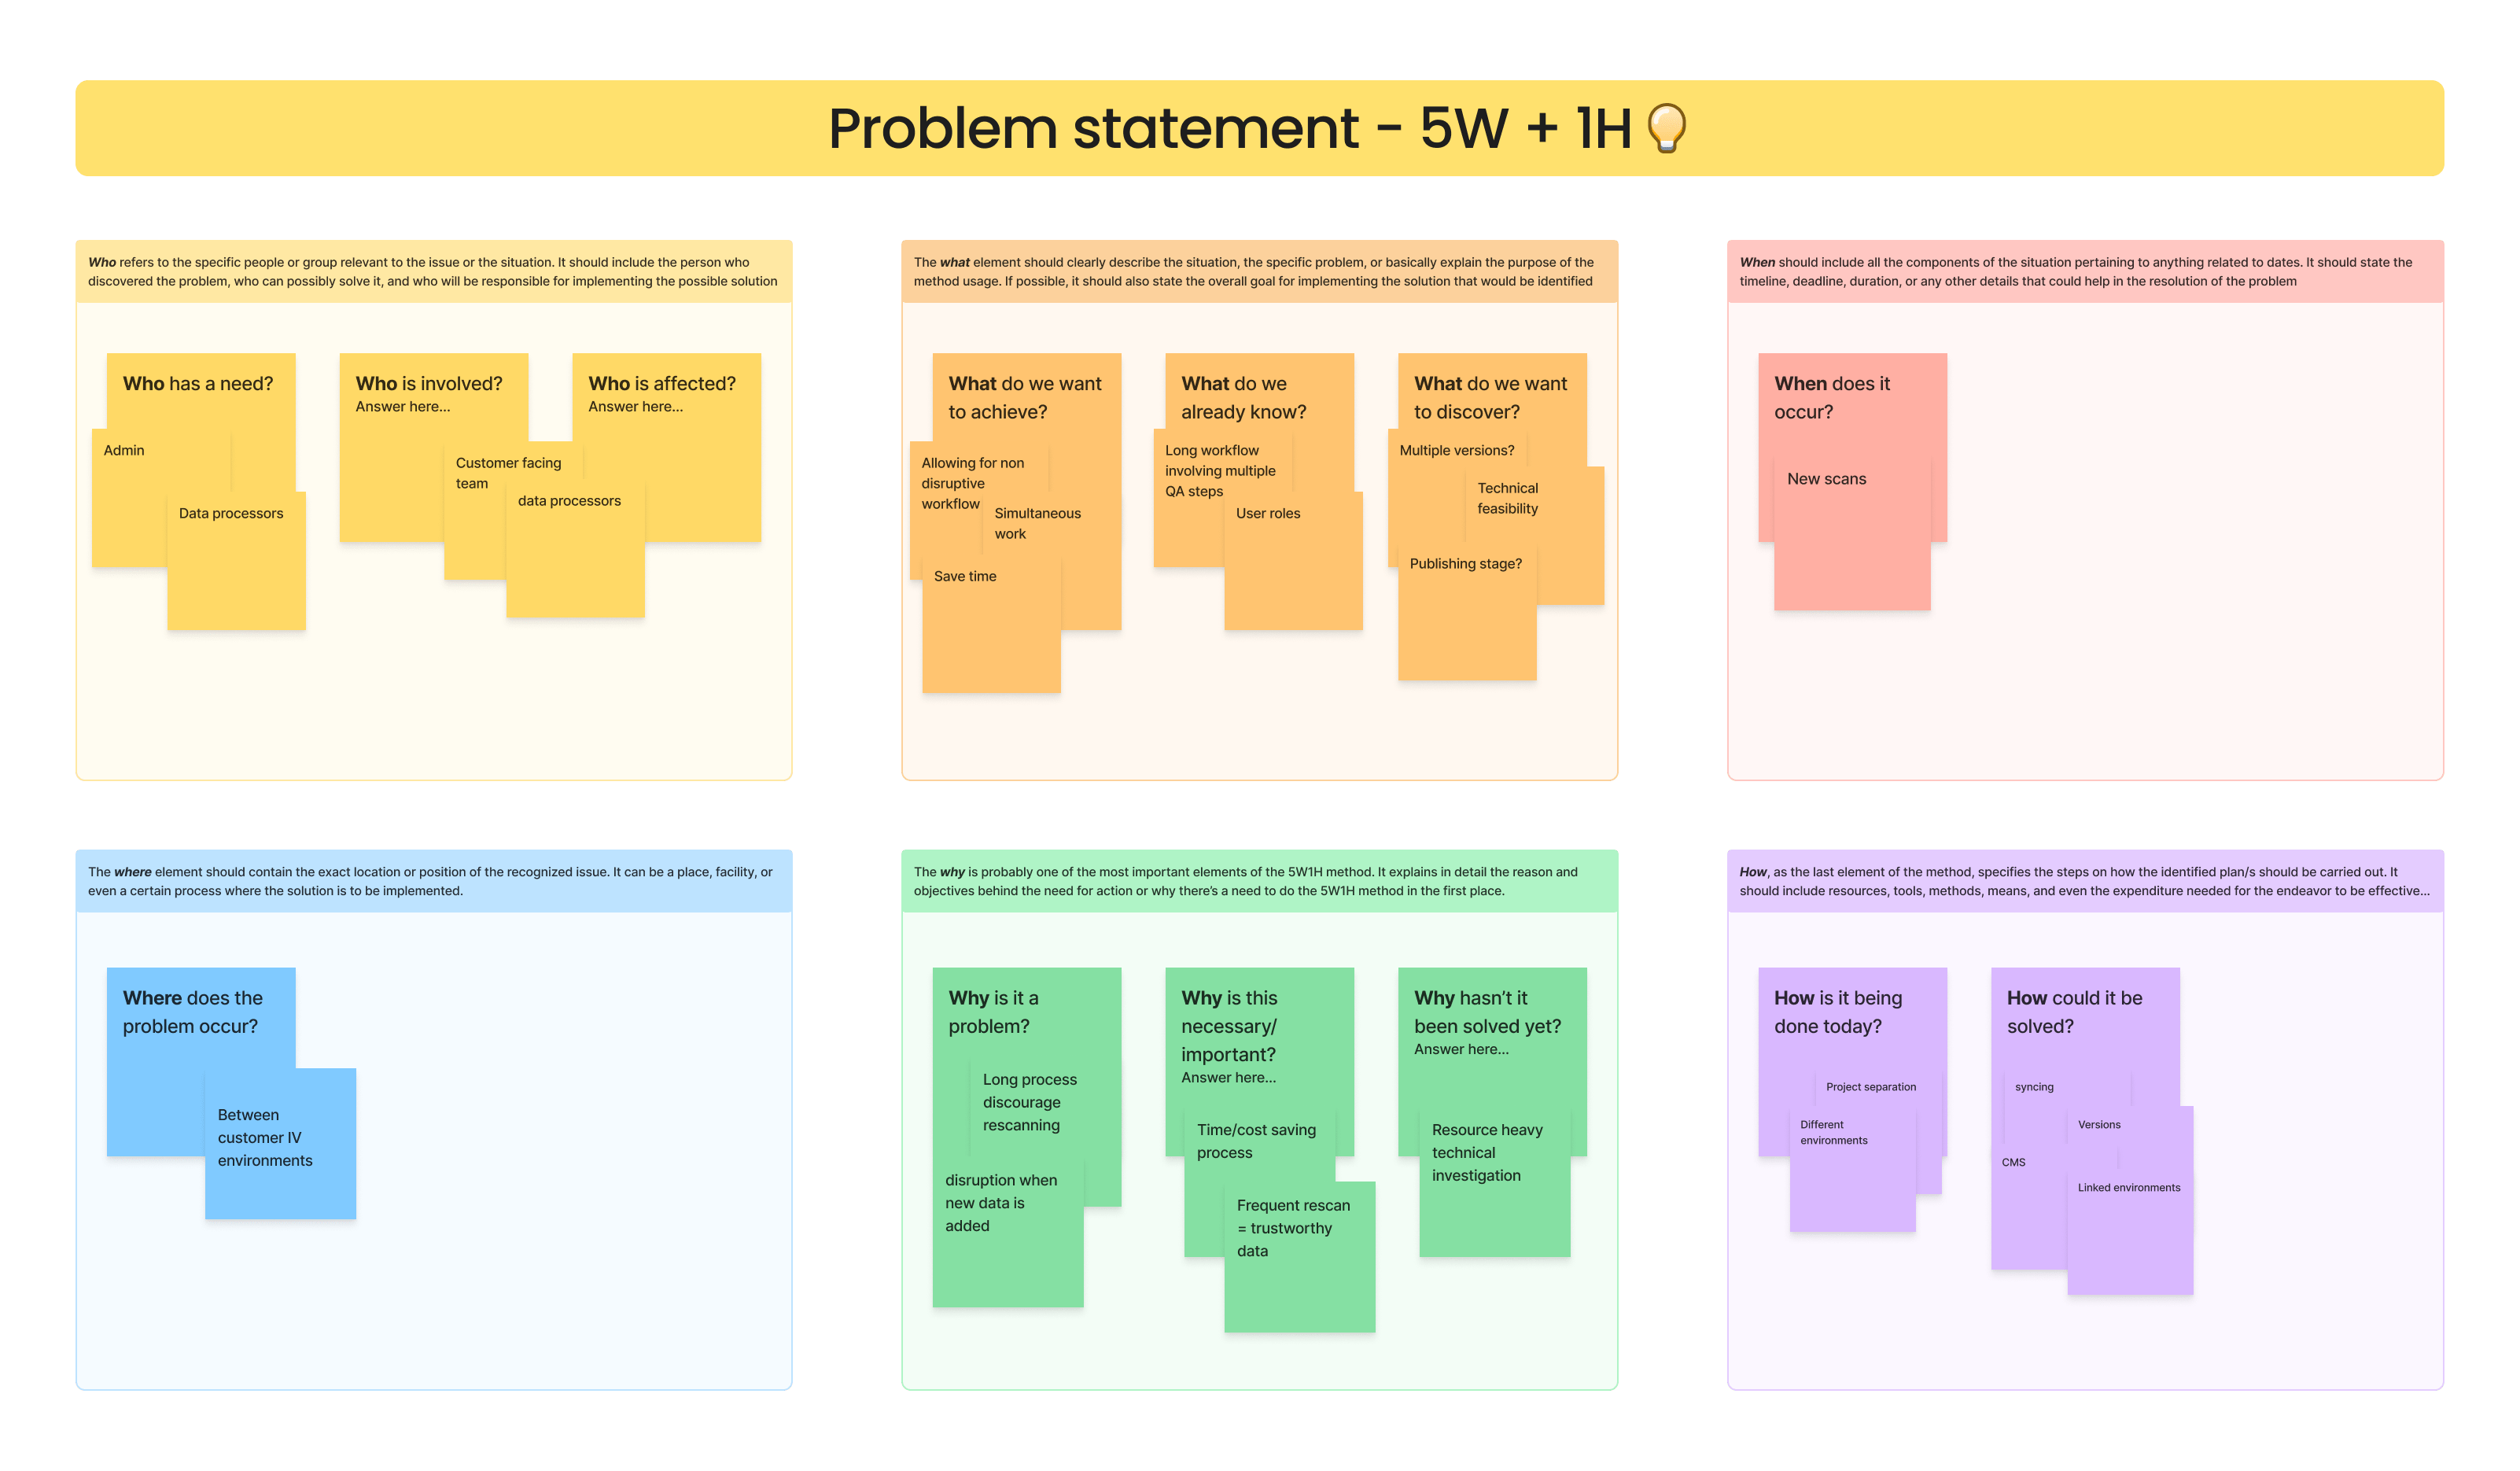 Problem statement - collection of notes using the 5W + 1H method to define the problem